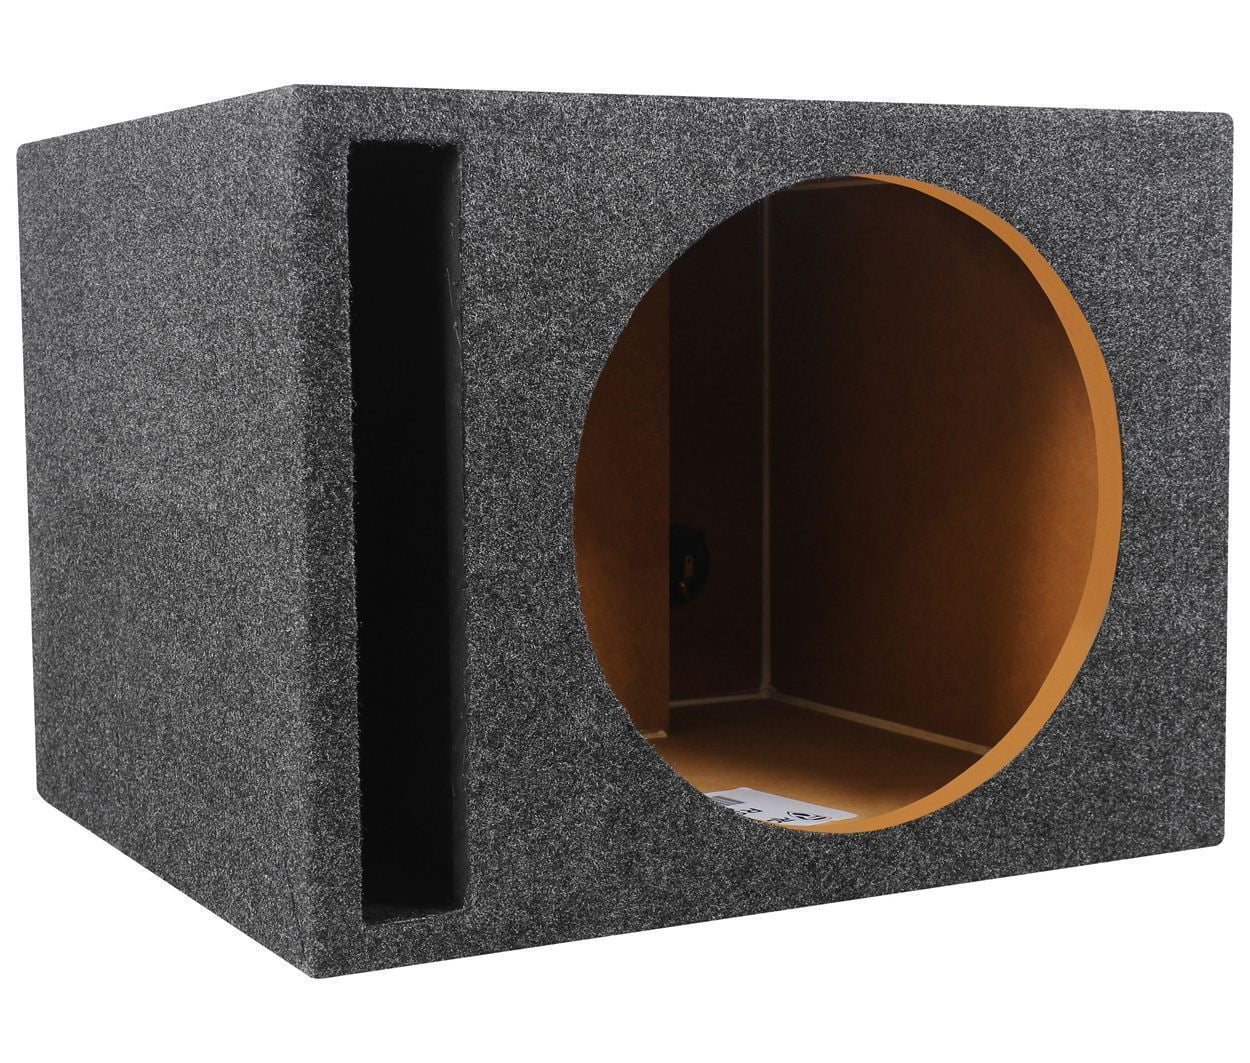 Subwoofer Box 10" Sealed 3/4" MDF Universal Made in USA 